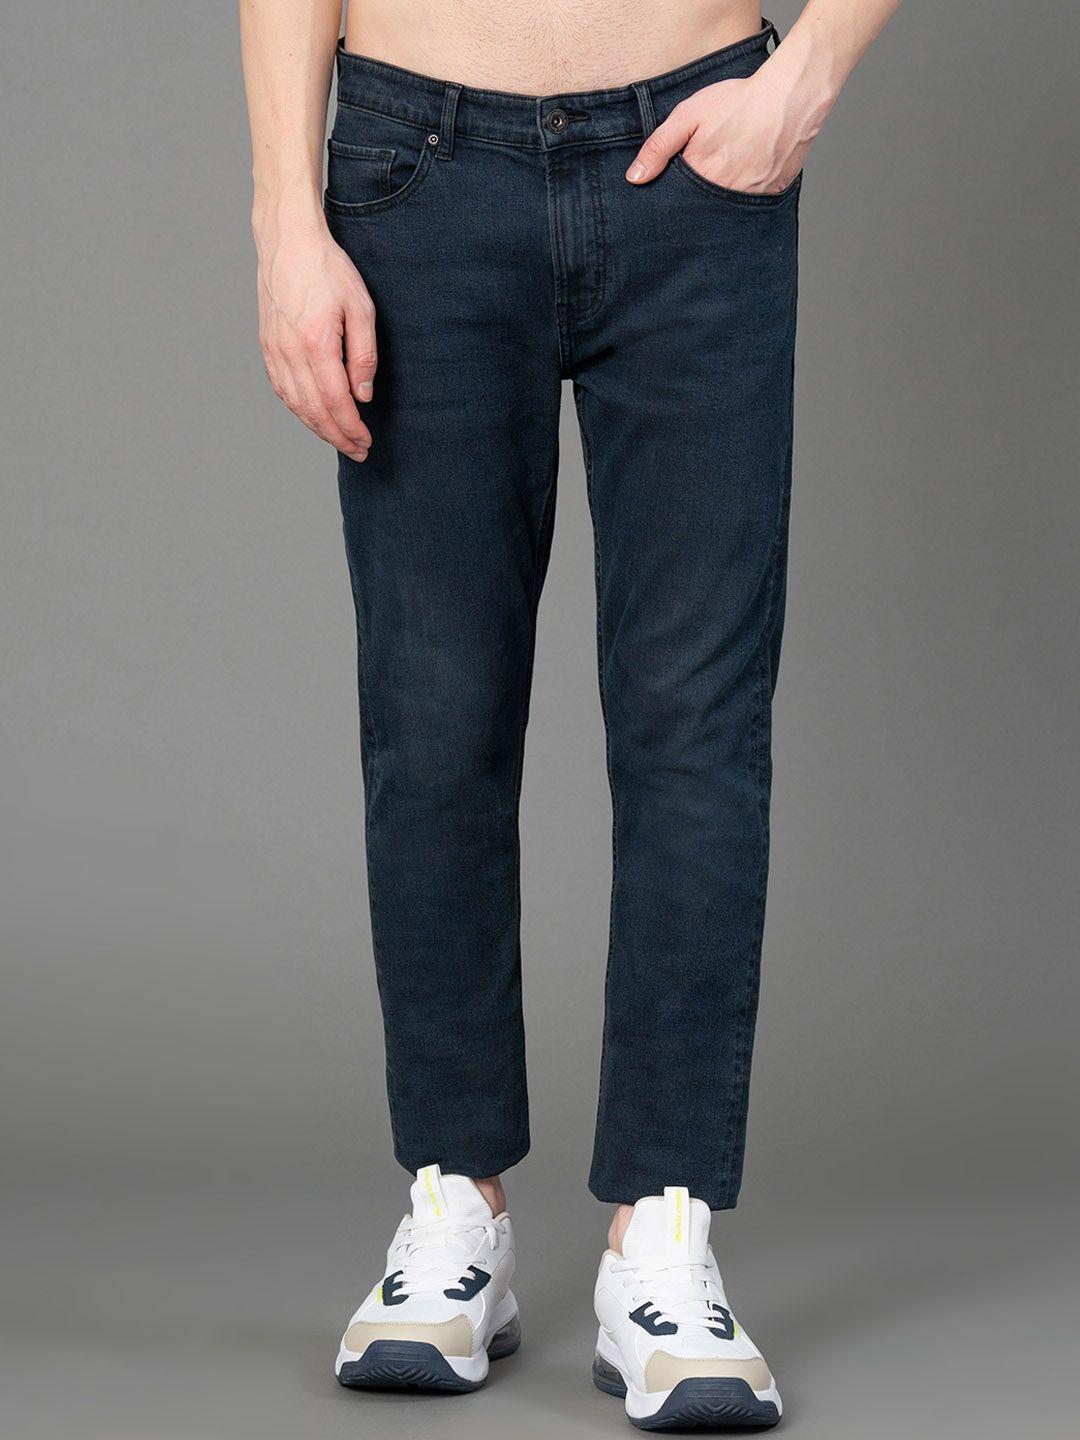 red tape men mid-rise stretchable jeans